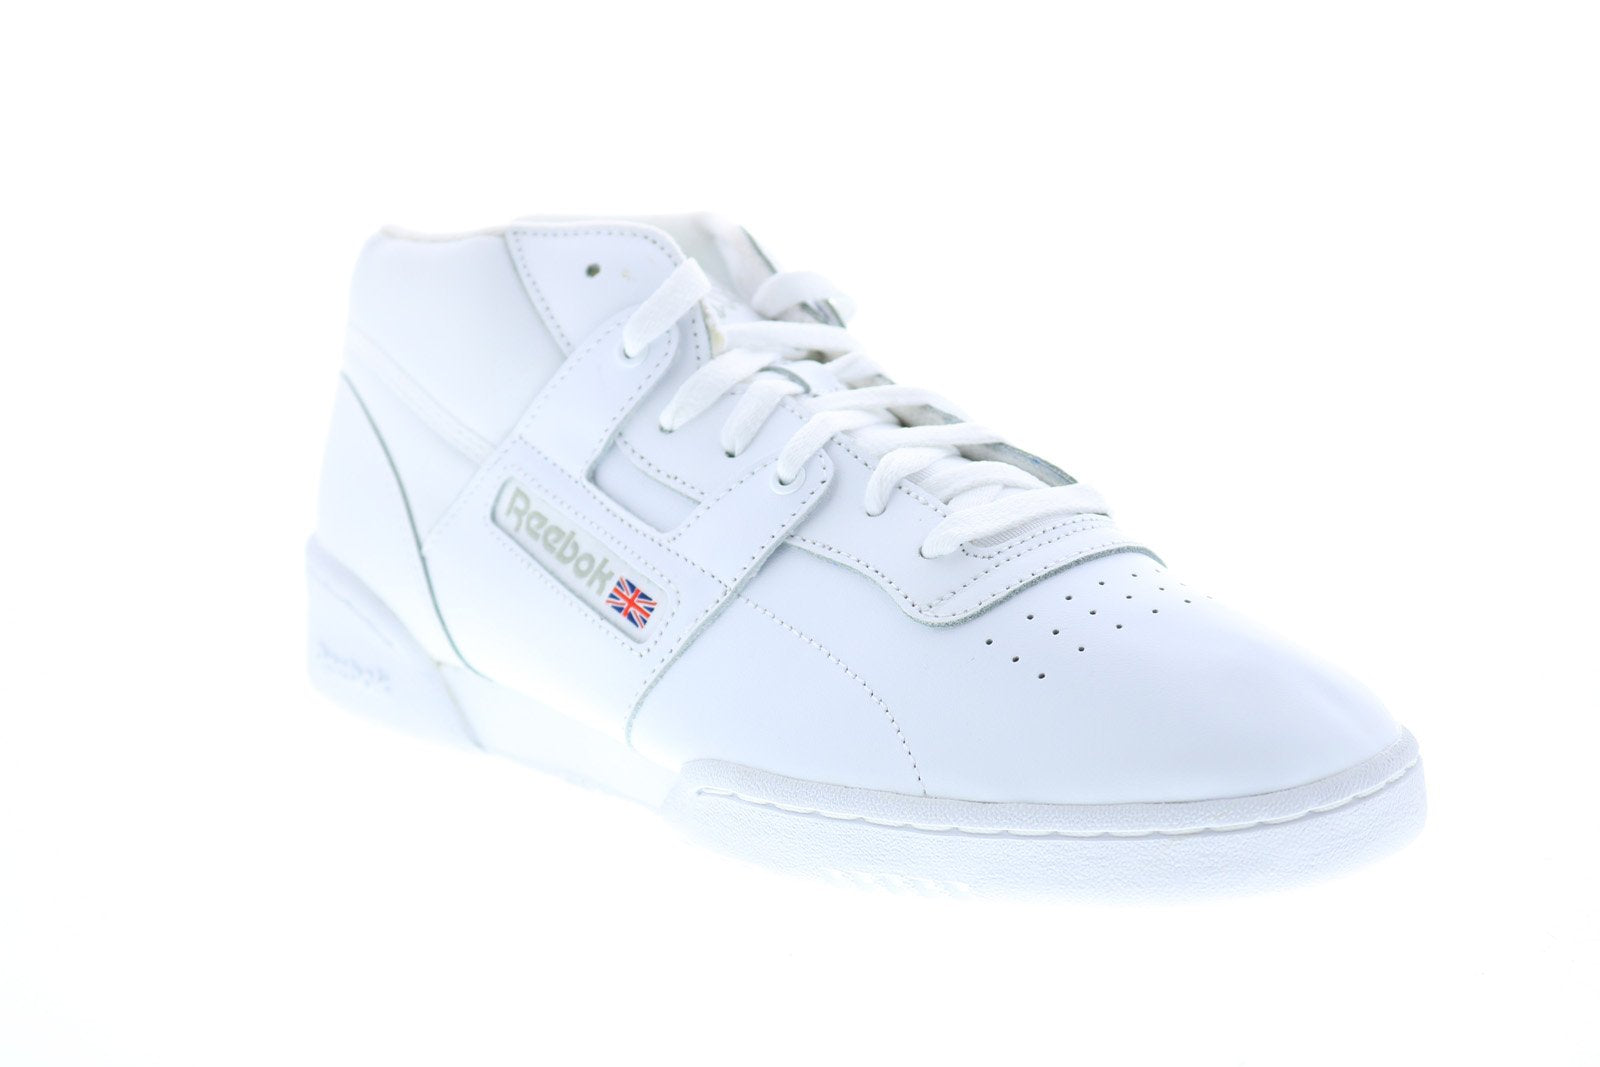 Metafor mover Fryse Reebok Workout Mid DV4576 Mens White Lace Up Lifestyle Sneakers Shoes -  Ruze Shoes